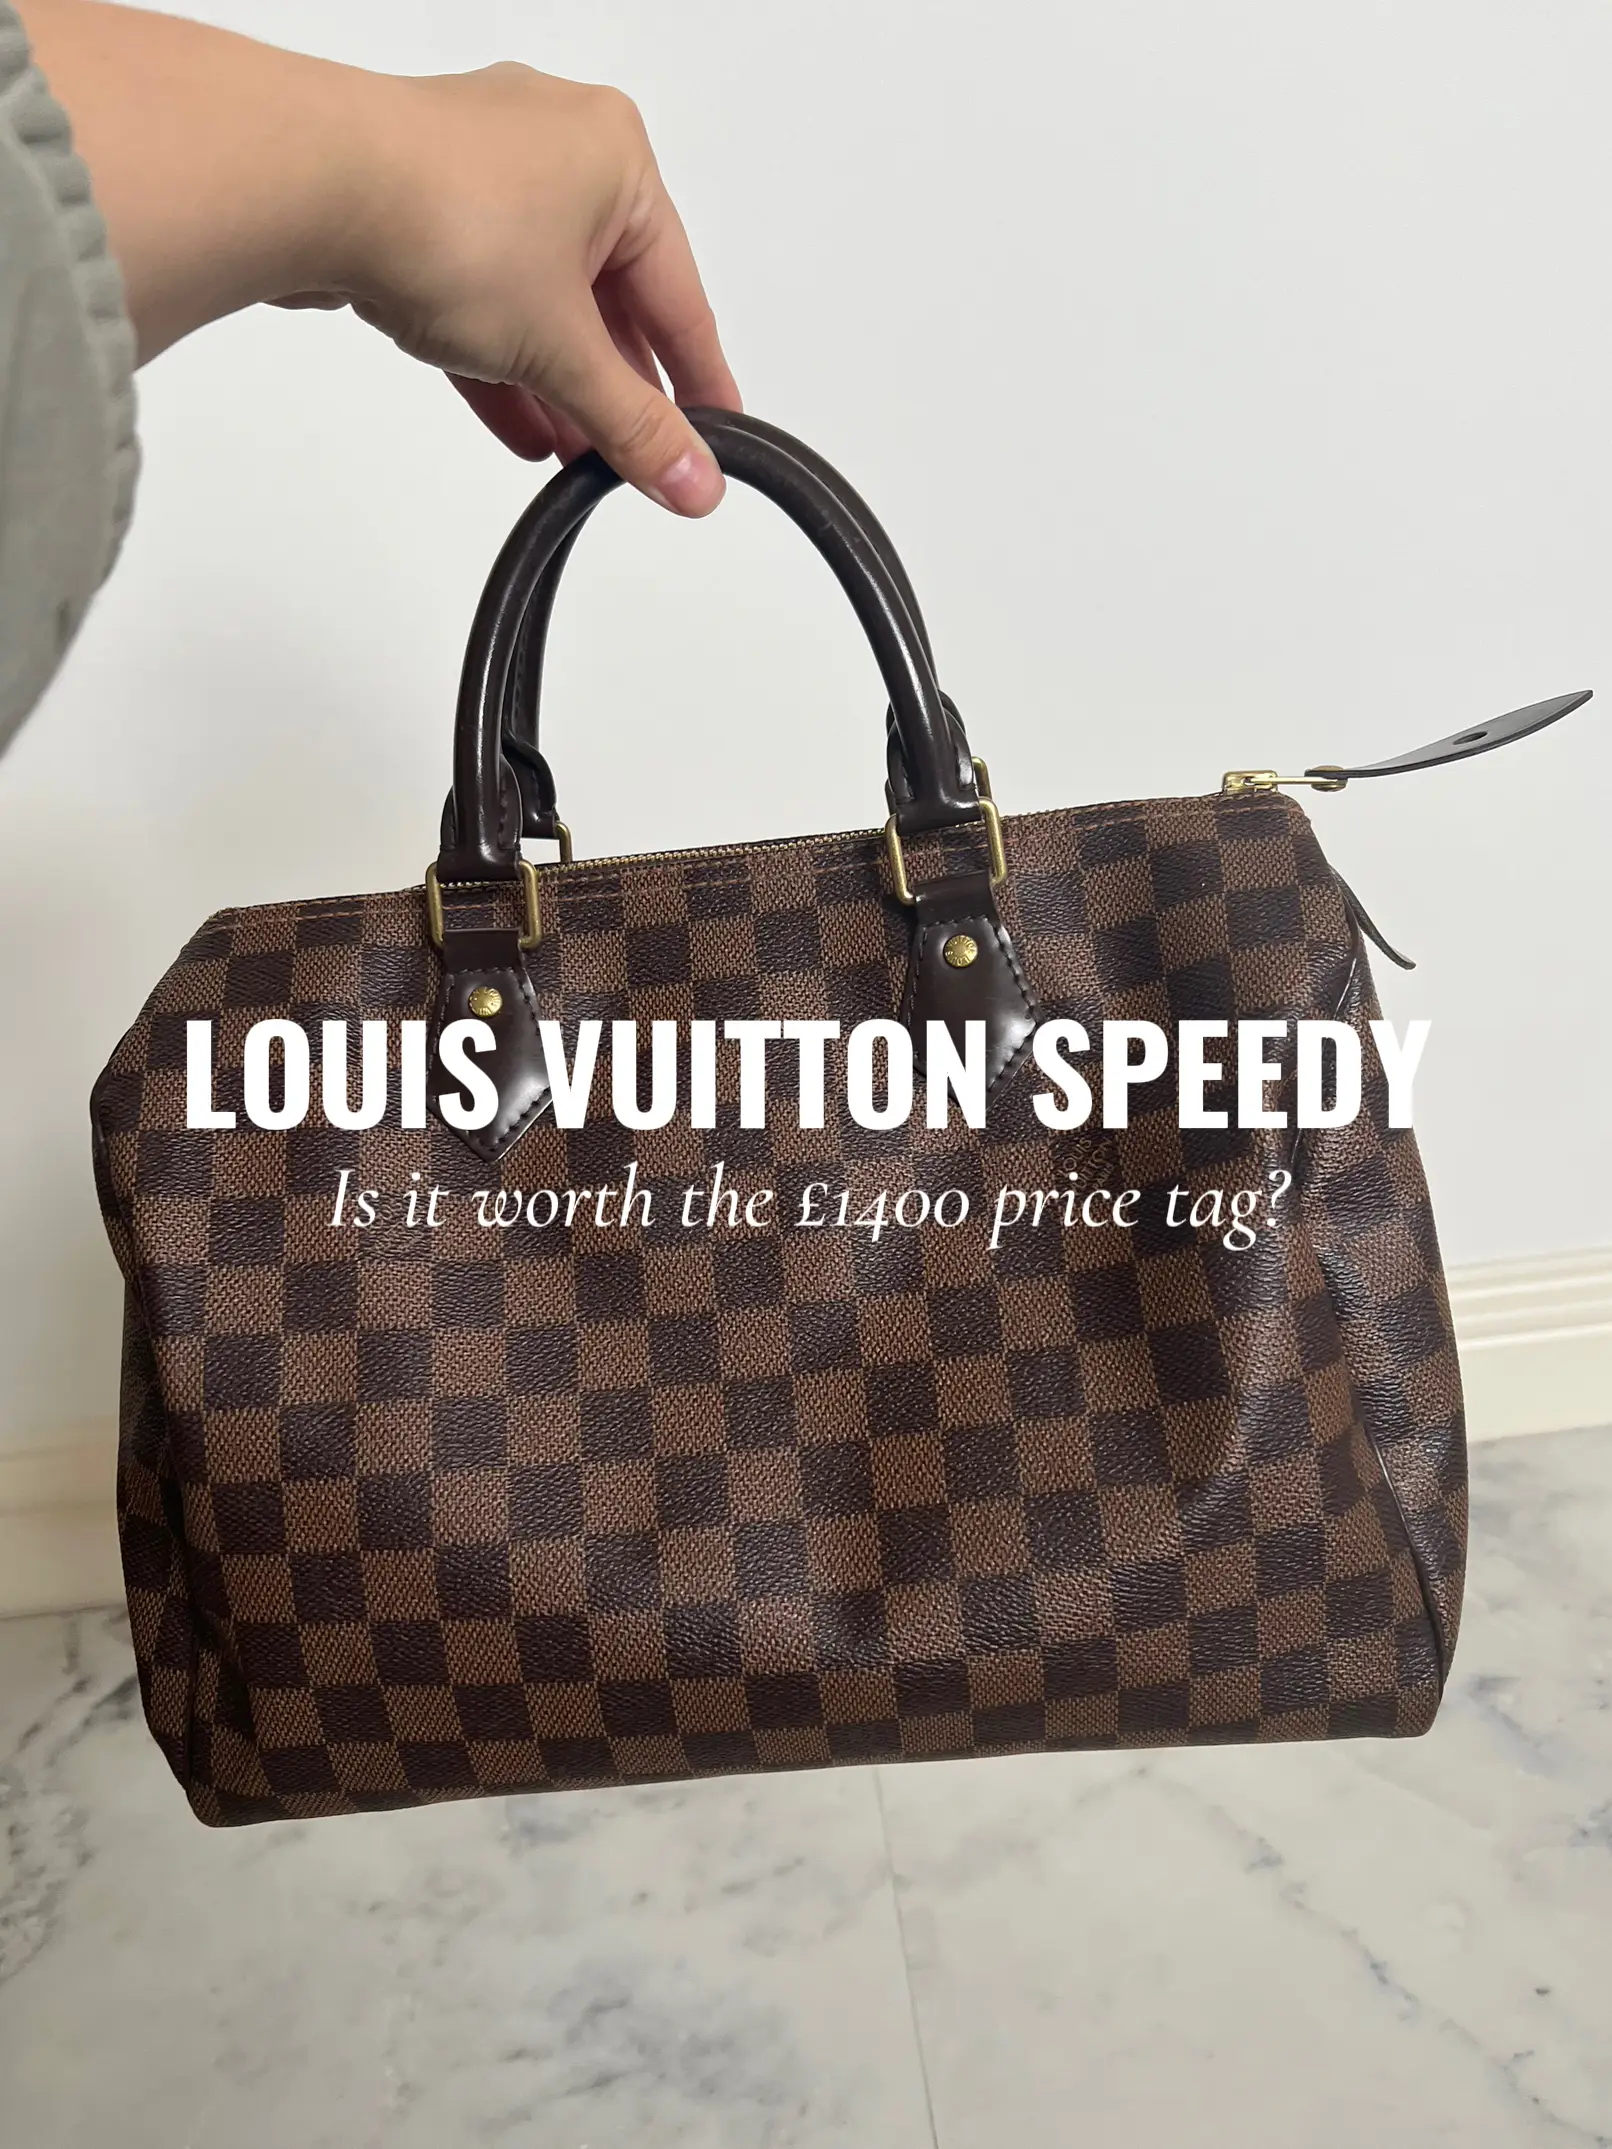 LOUIS VUITTON SPEEDY 30 DAMIER EBENE REVIEW + WHAT'S IN MY BAG?